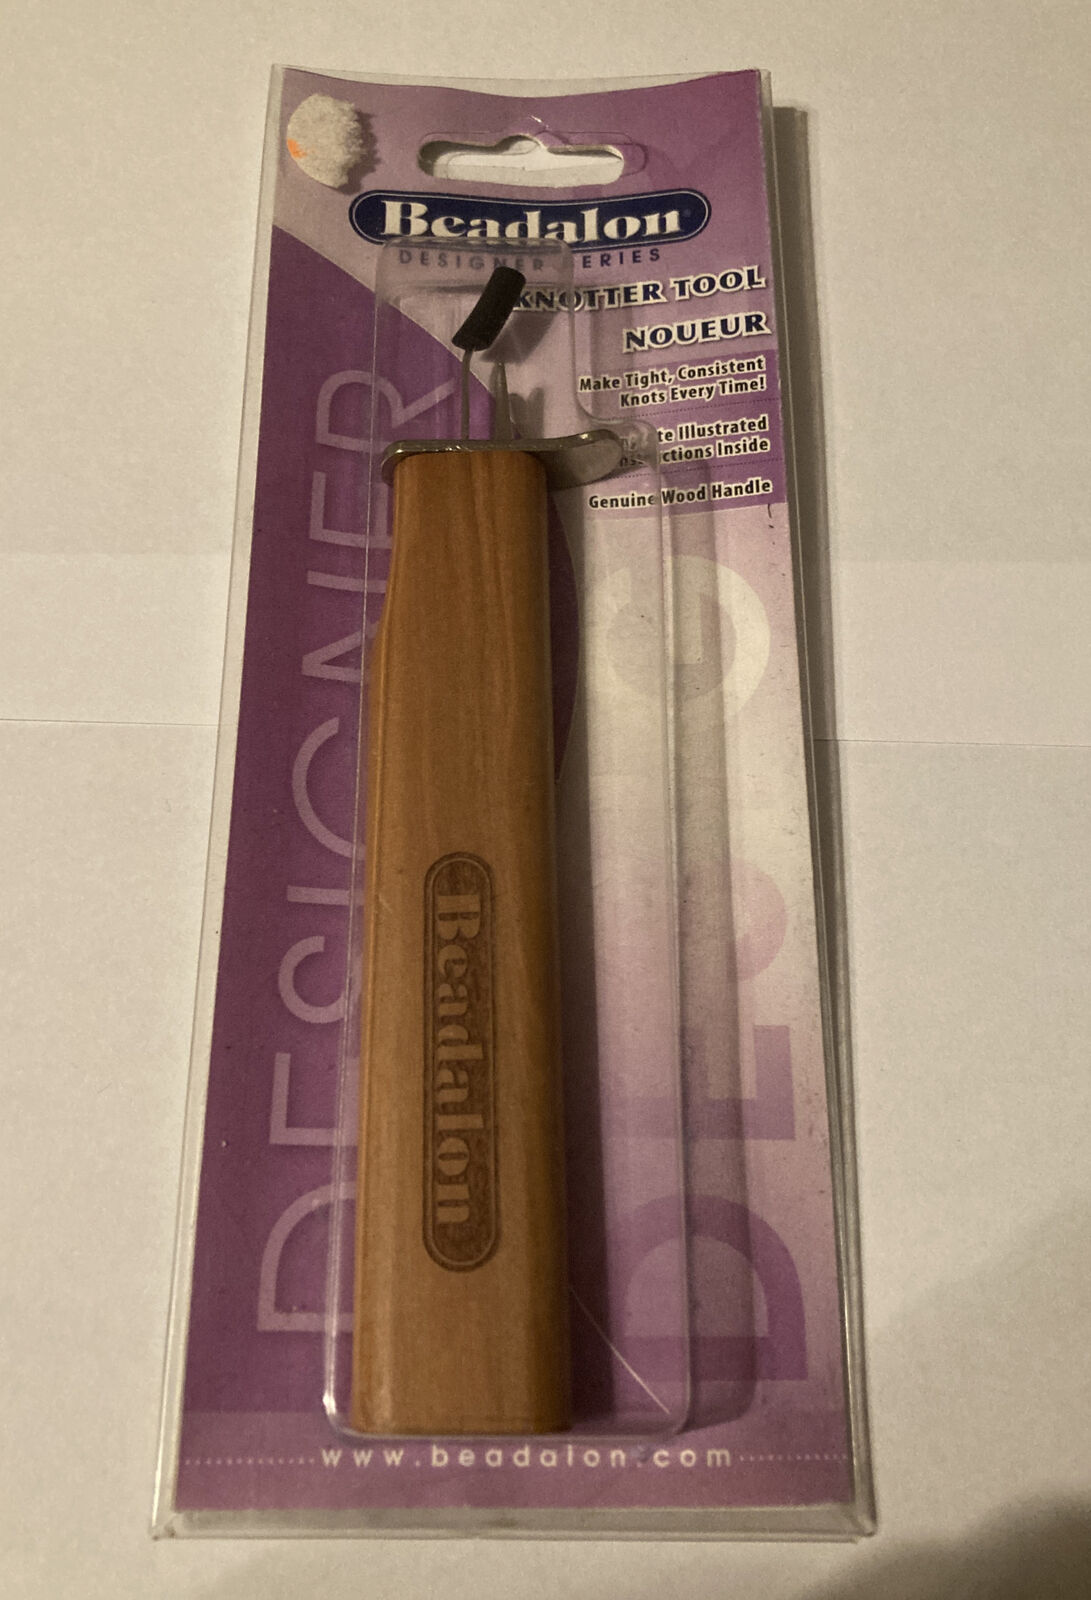 Brand New Beadalon Knotter Tool Noueur Make Tight Consistent Knot Every Time!